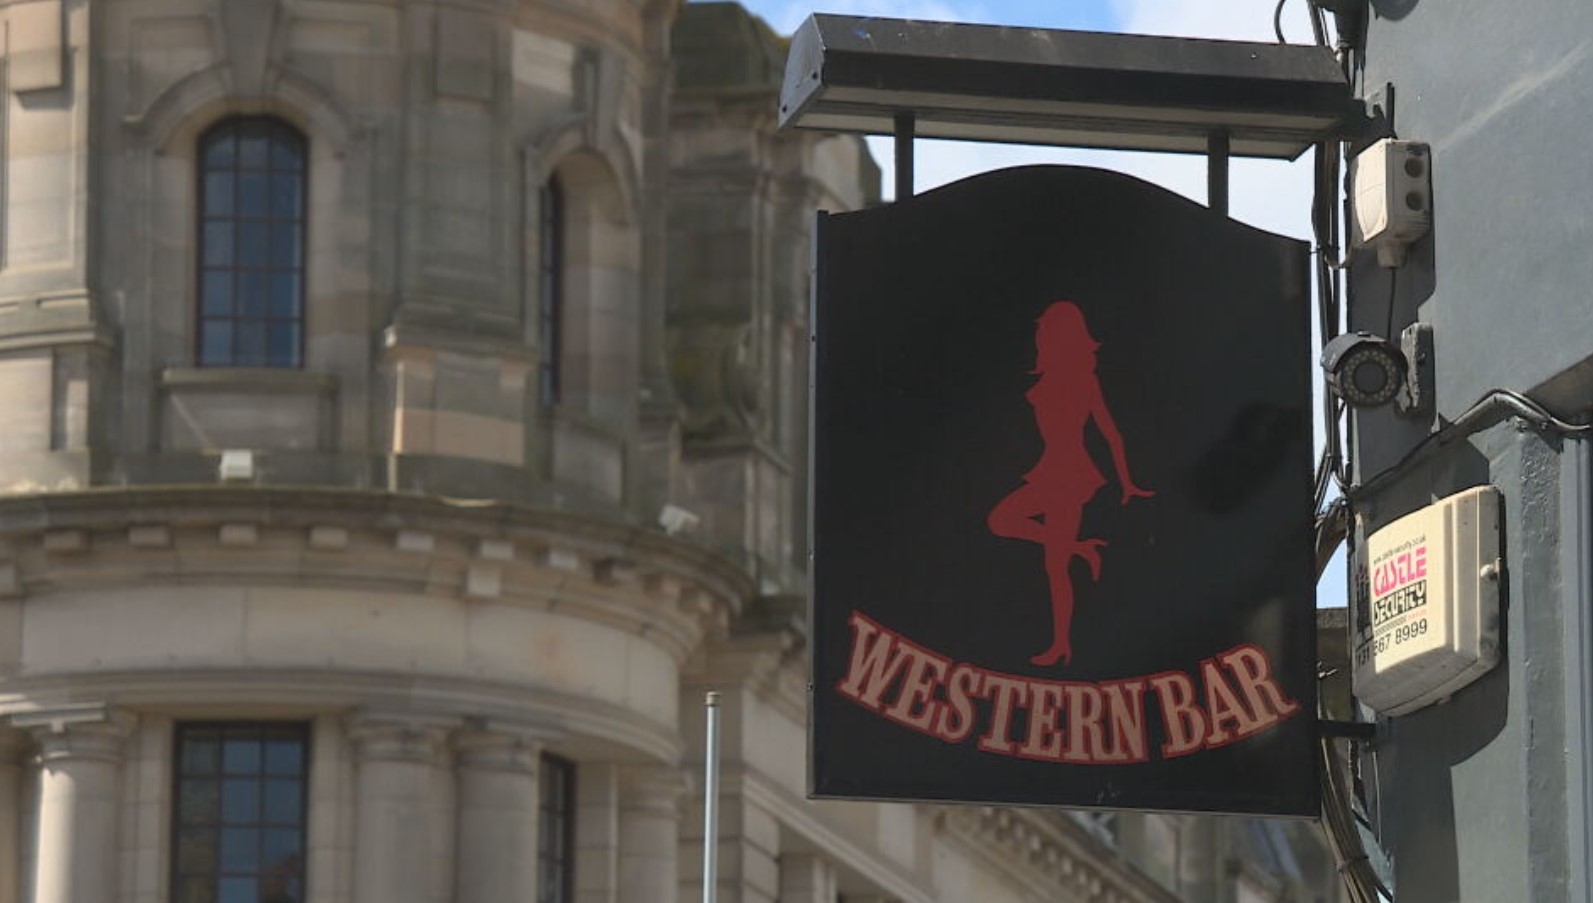 Councillors voted to allow three strip clubs in Edinburgh to continue operating